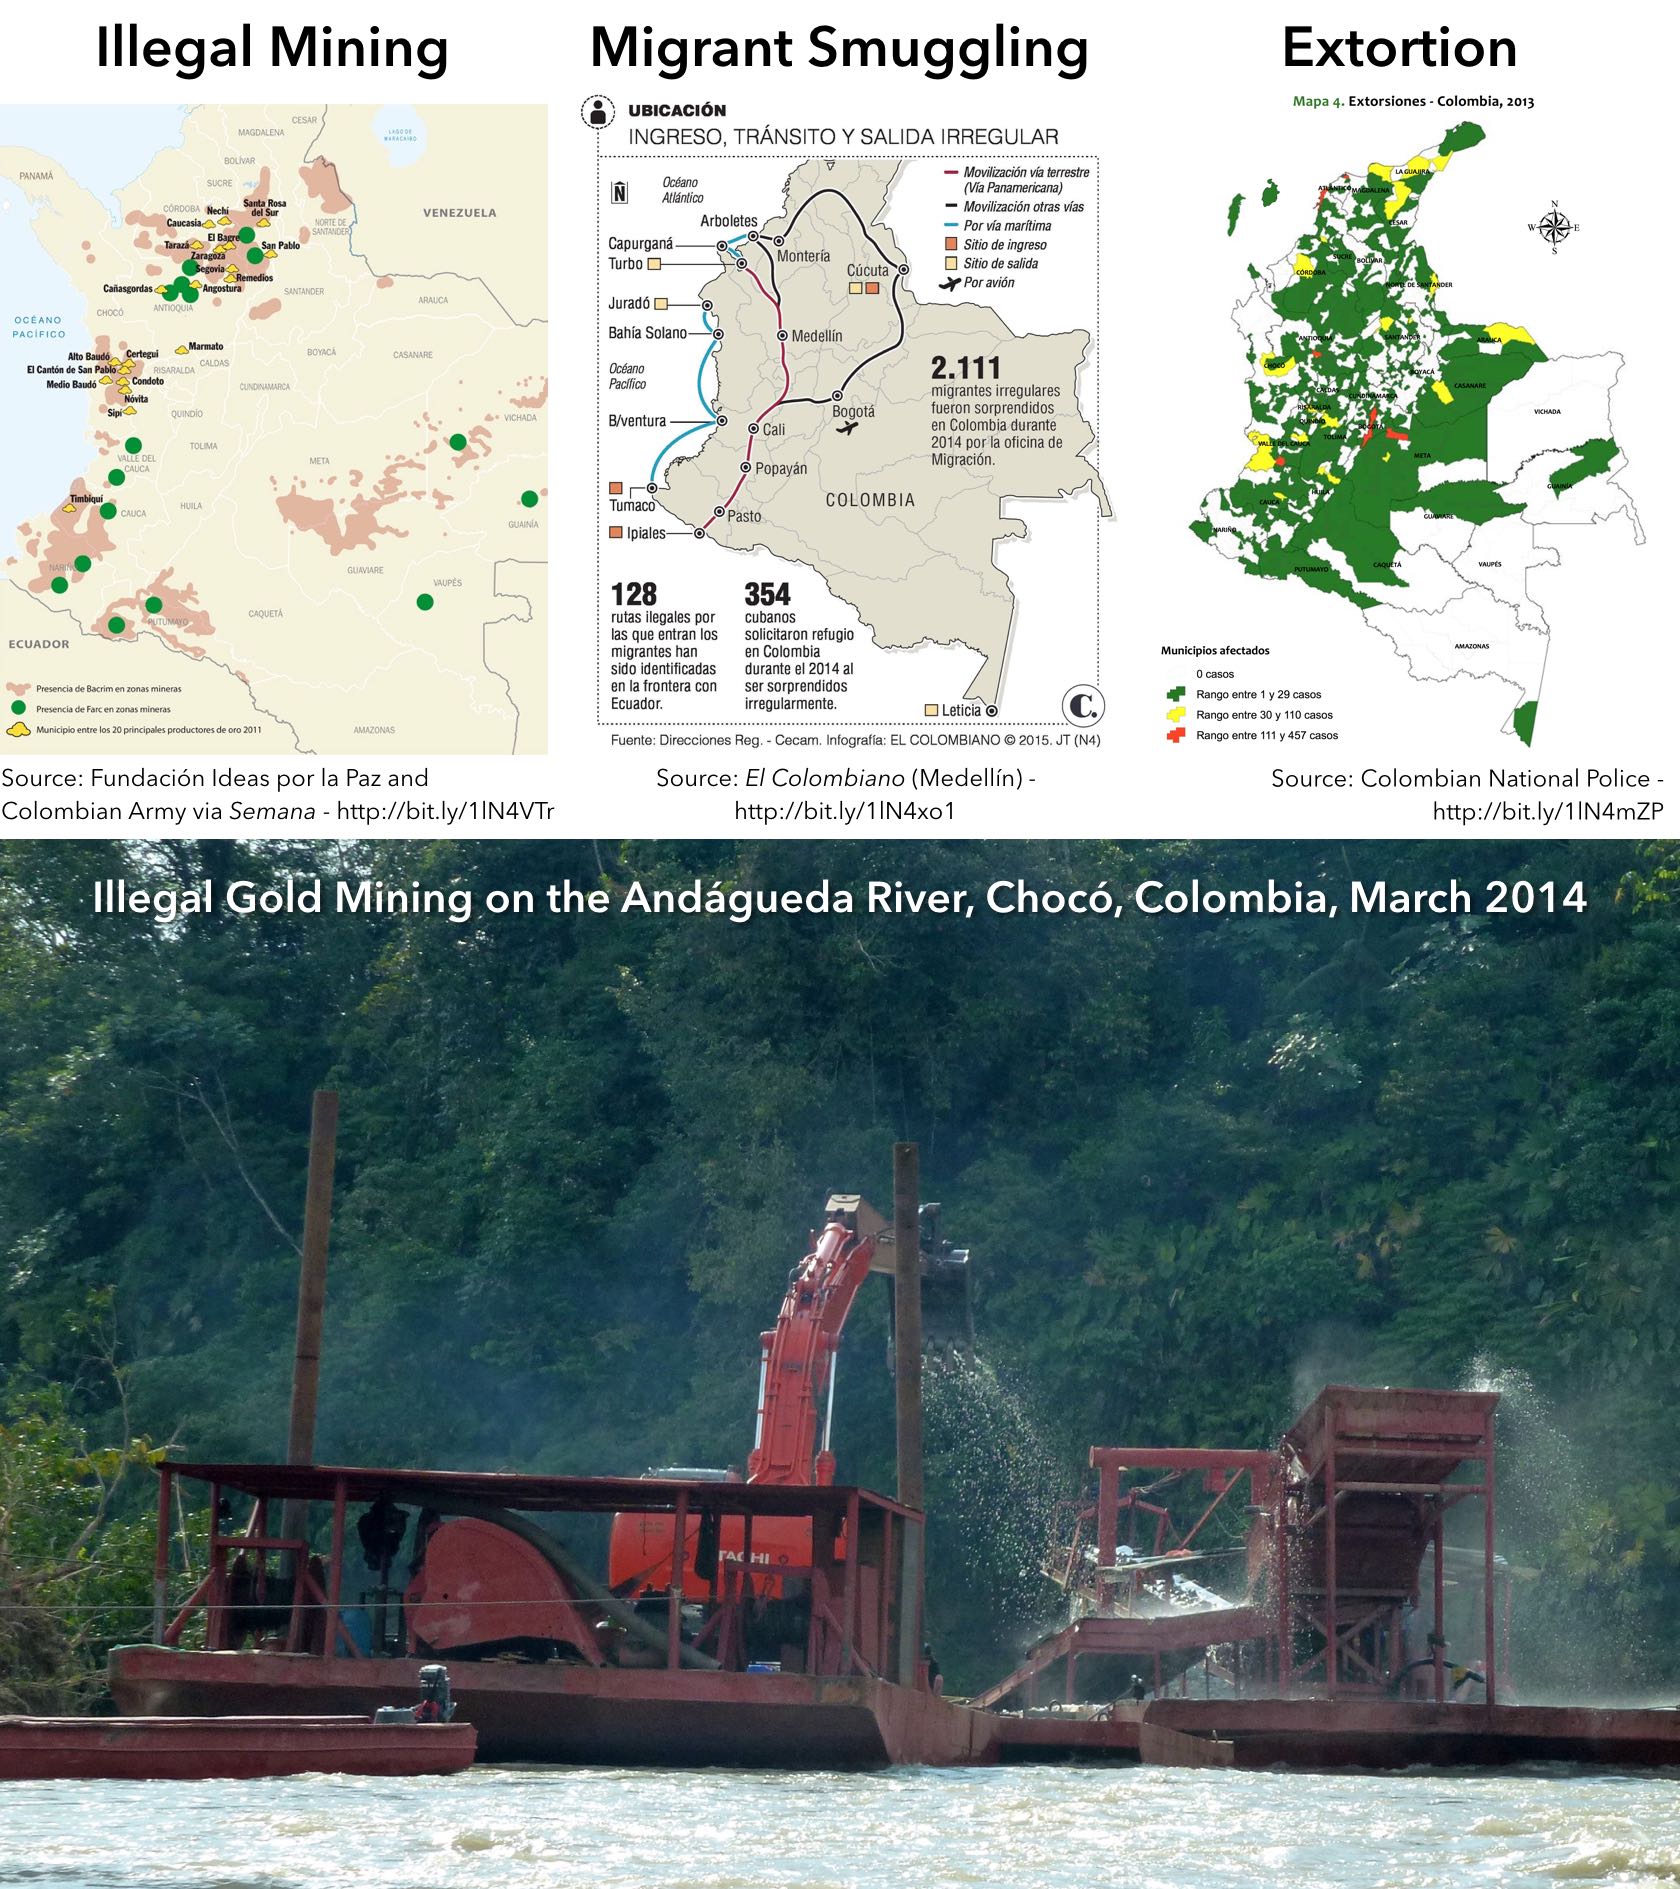 Maps of illegal mining, migrant smuggling, and extortion prevalence, and photo of an illegal gold mine along a river in Chocó